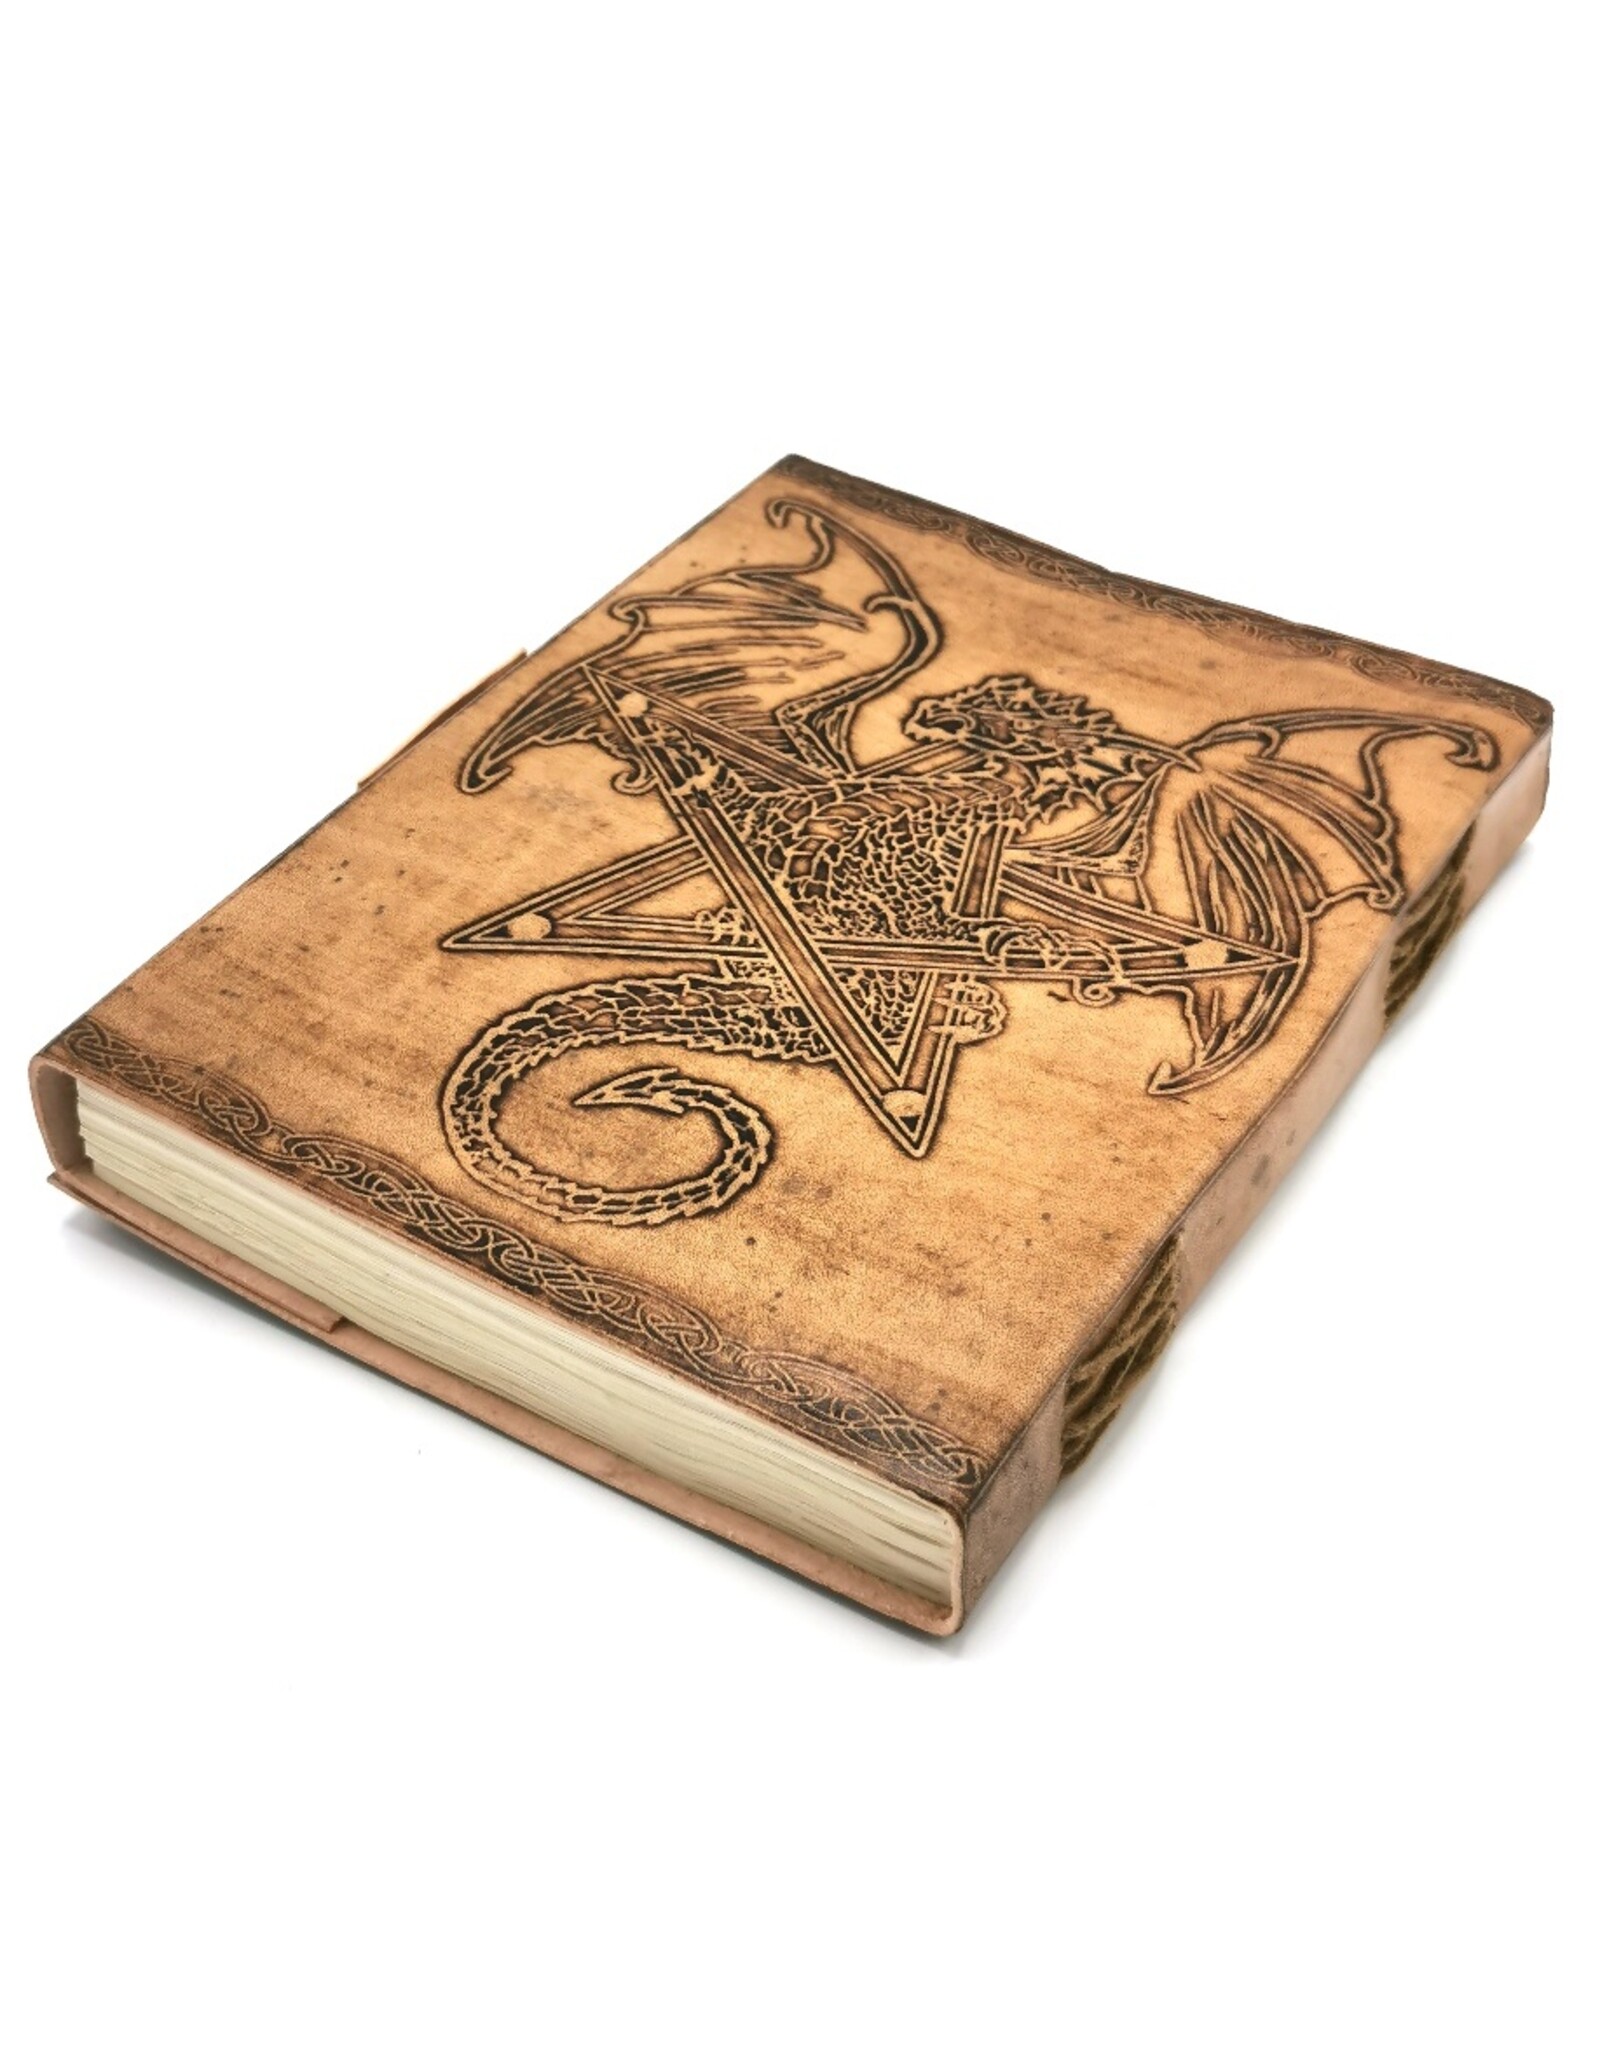 AWG Miscellaneous - Leather Journal with Embossed Dragon & Pentagram 20cm x 15cm